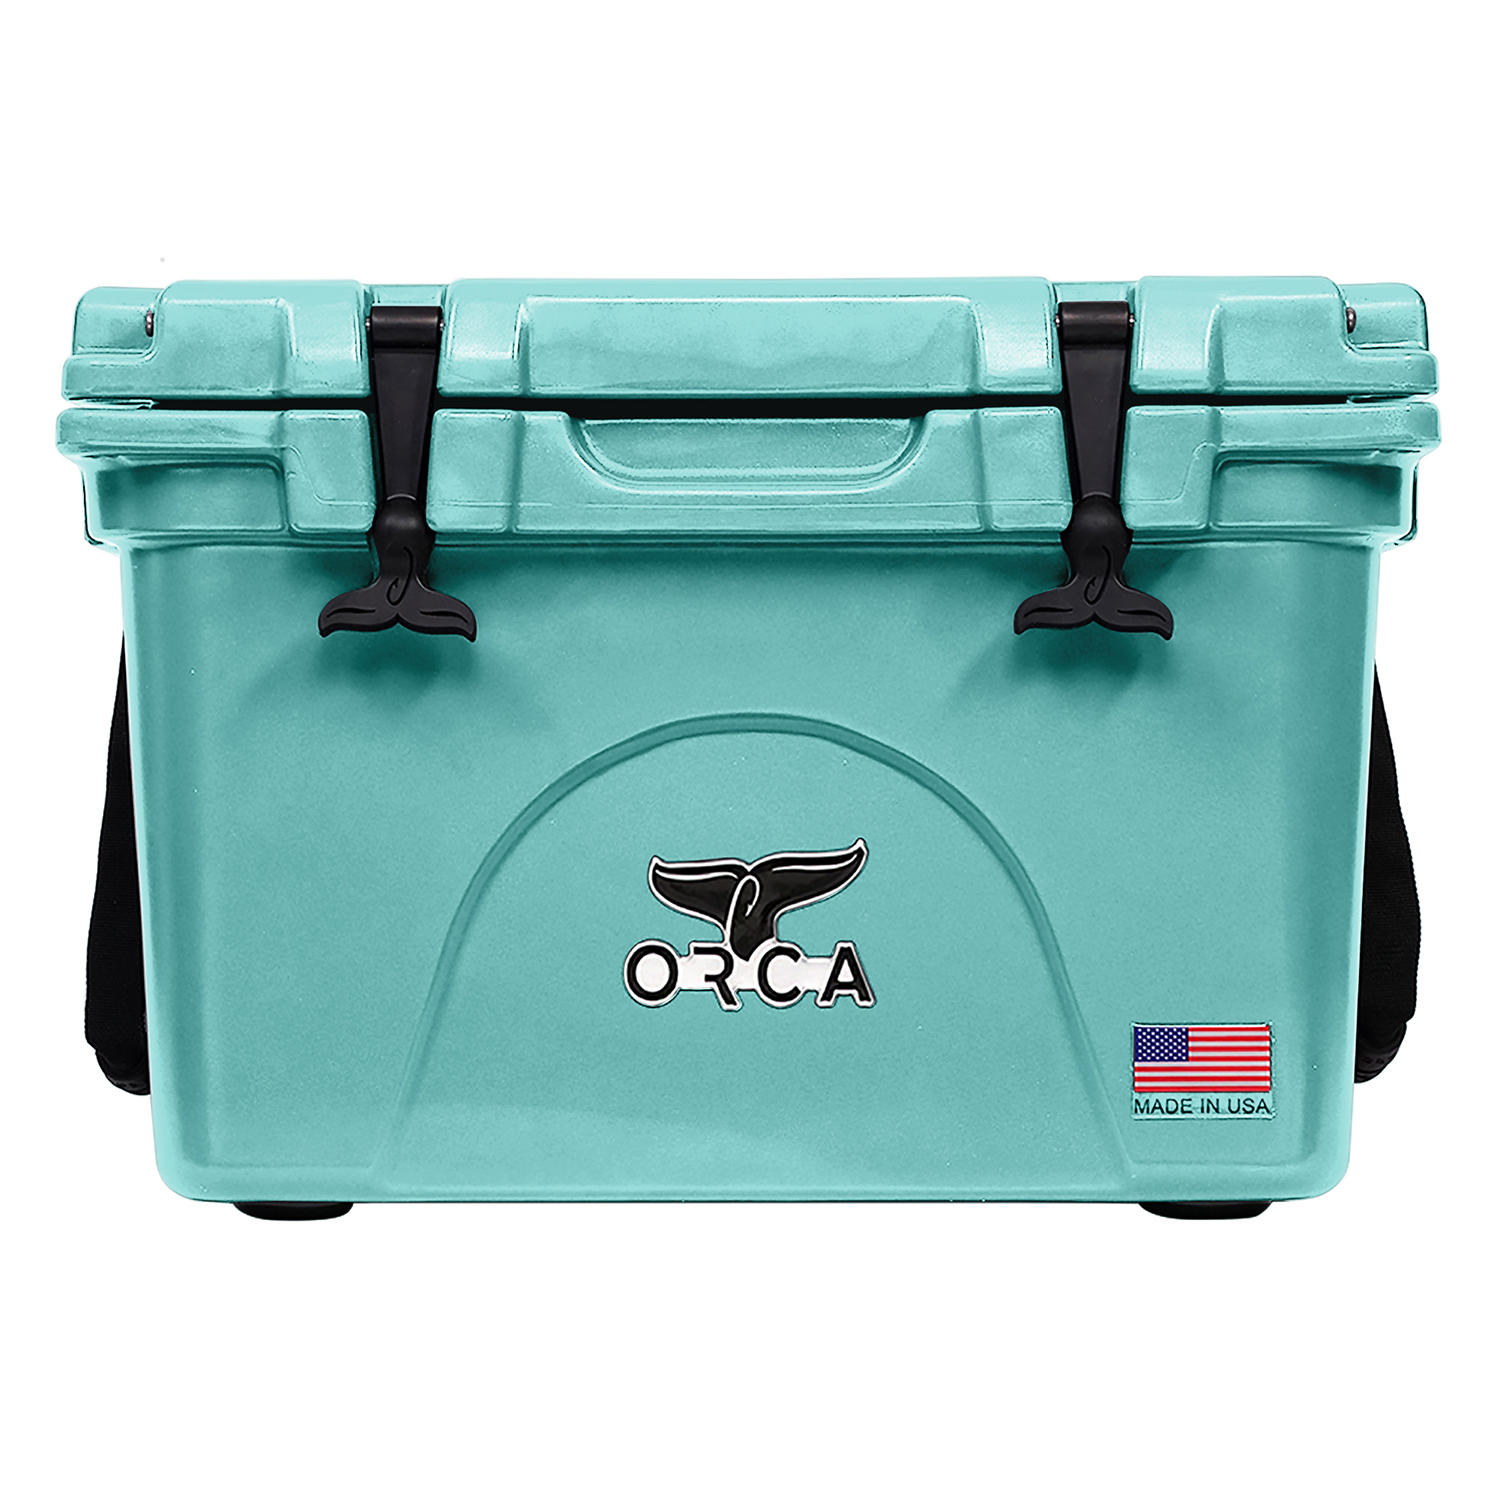 ORCA 35-Quart Cooler with Built-in Insulation